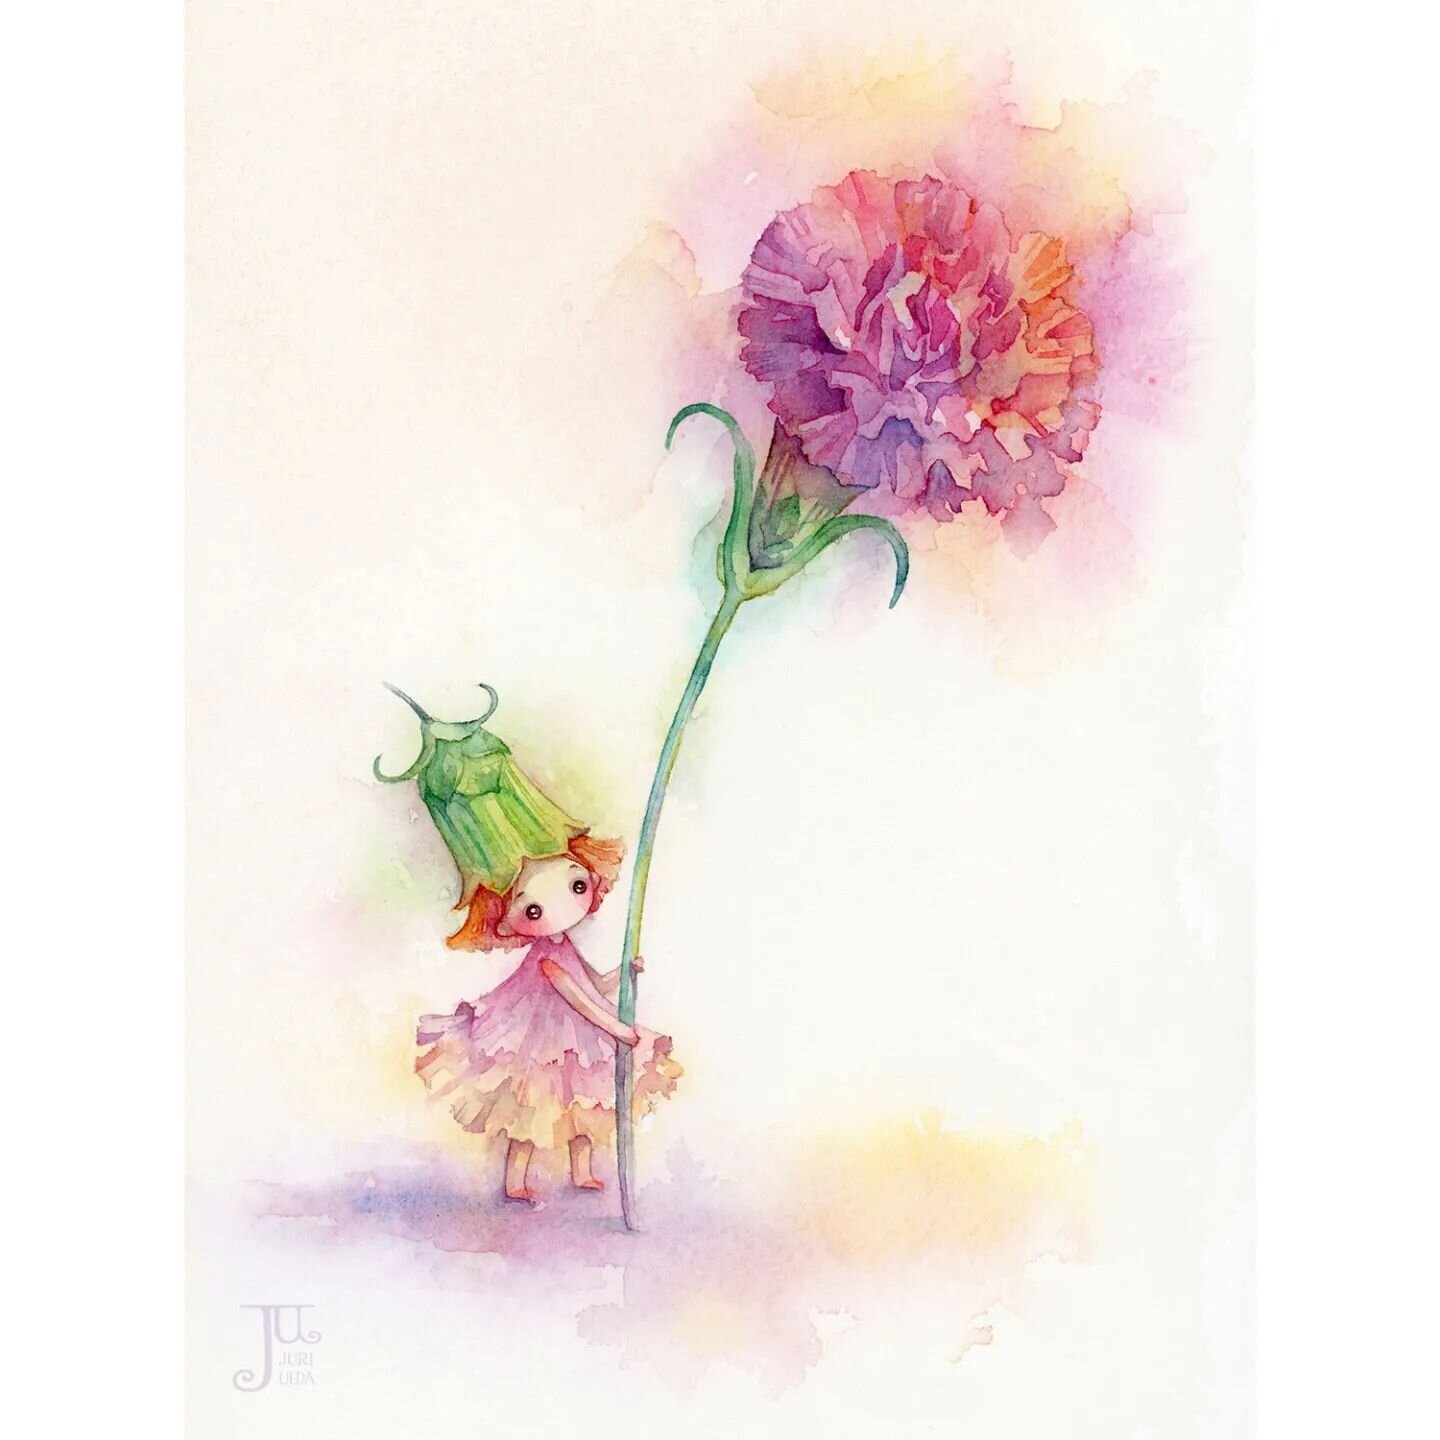 Happy Mother's Day!
Wishing you a fantastic day of love and appreciation💐

#watercolor #aquarelle #whimsicalart #carnation #mothersday